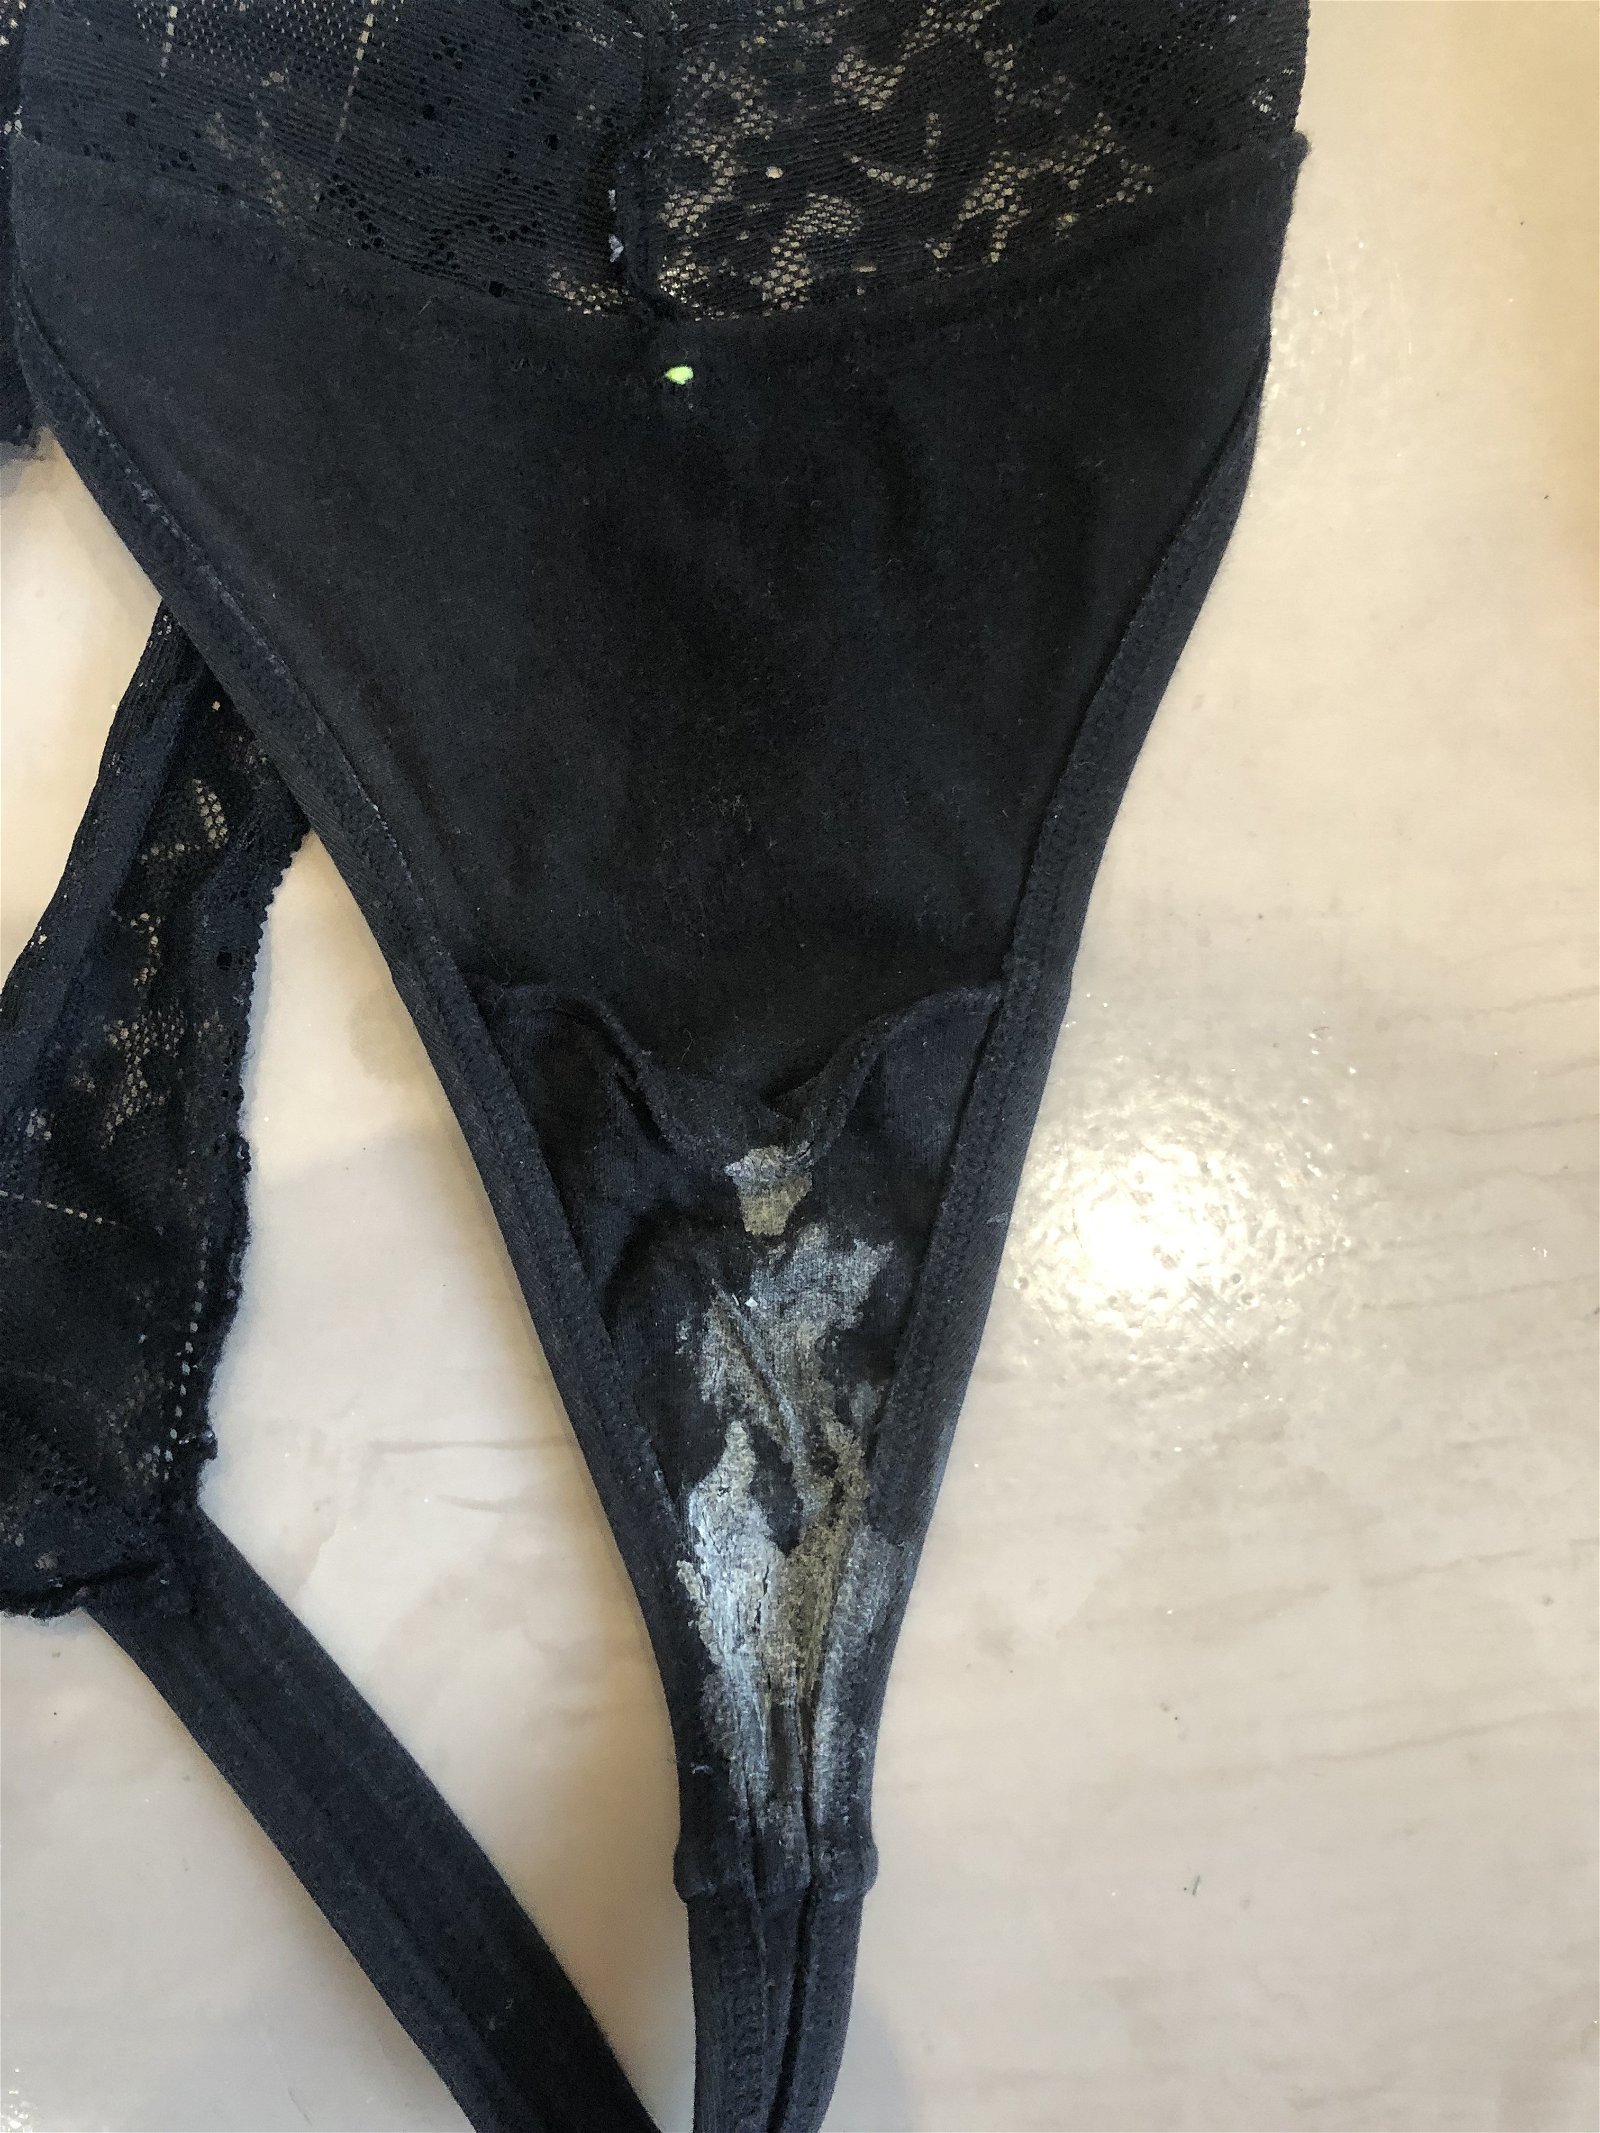 Photo by Cheatingwife101 with the username @Jkd082,  July 22, 2019 at 4:04 AM. The post is about the topic Creampie Panties and the text says 'My wife’s panties full of cum after another girl’s night out!'